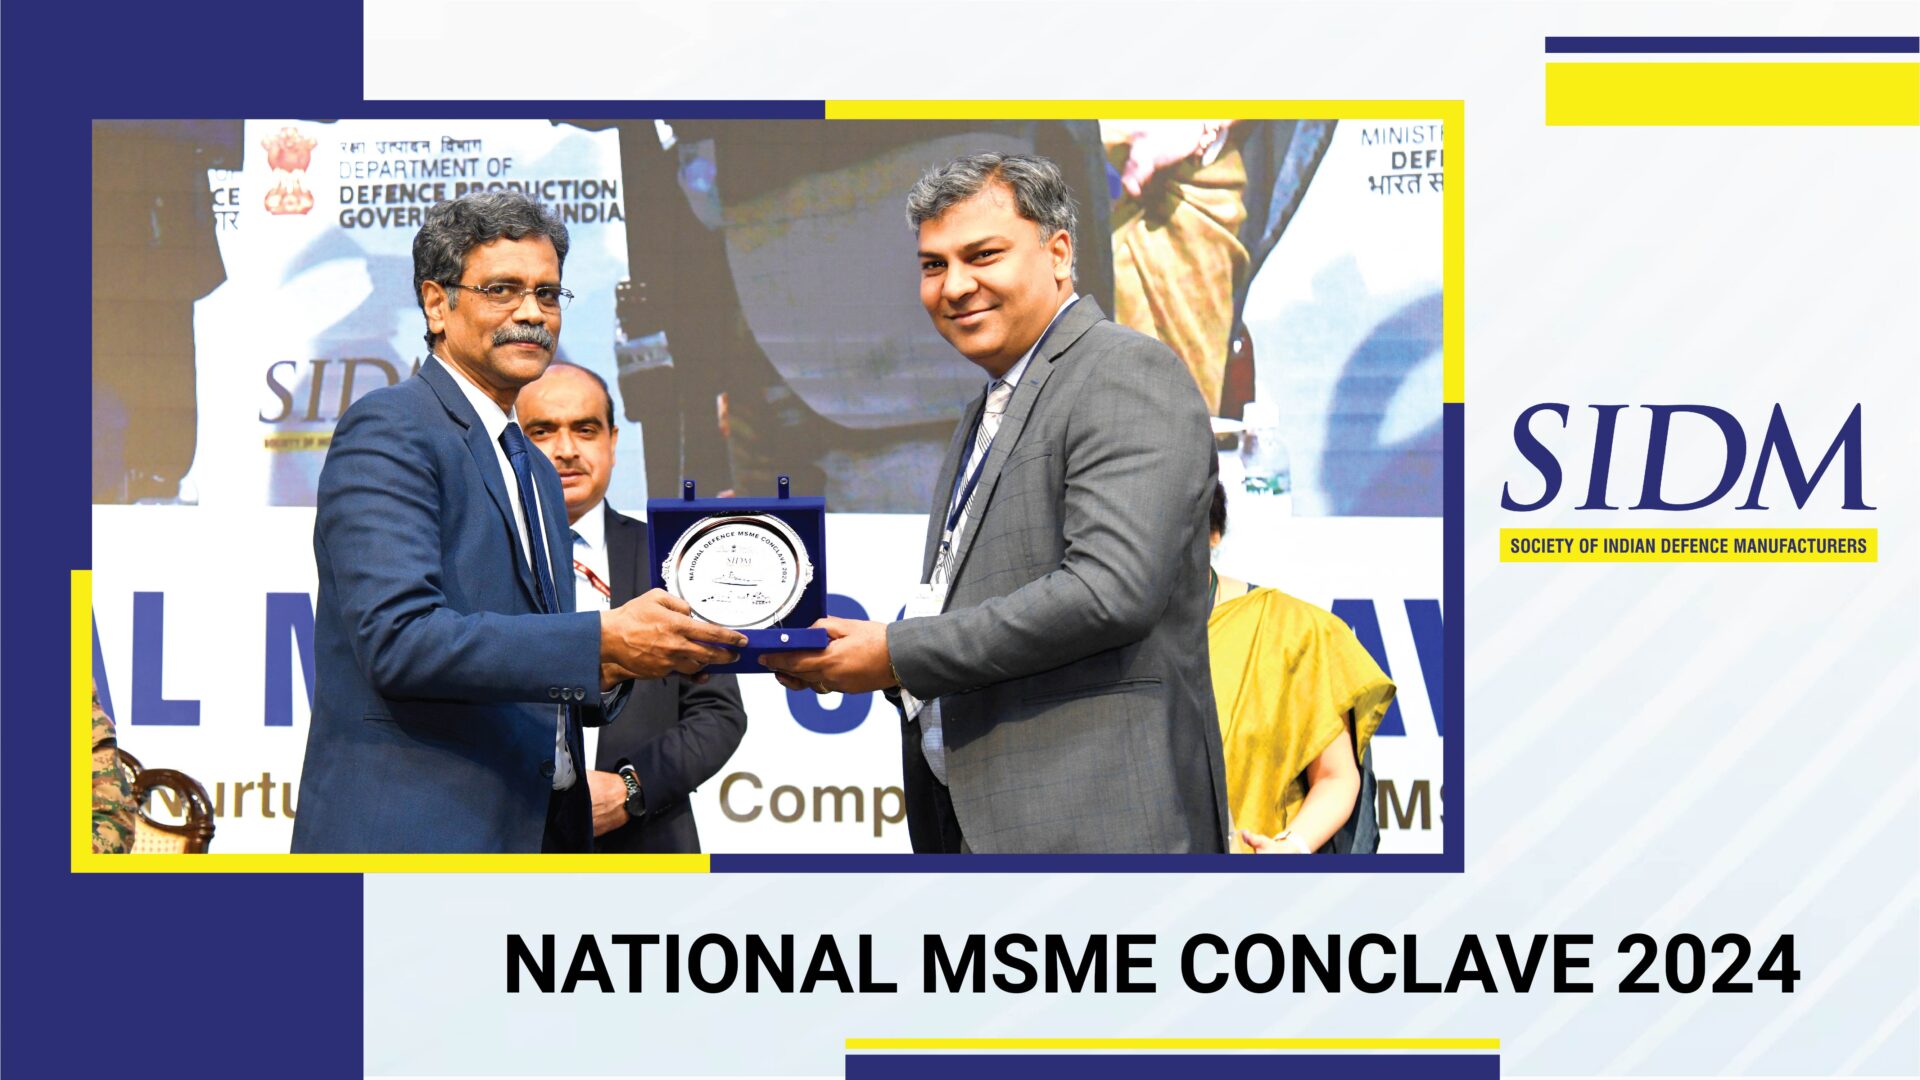 National MSME Conclave 2024 | Export Ready India | SIDM